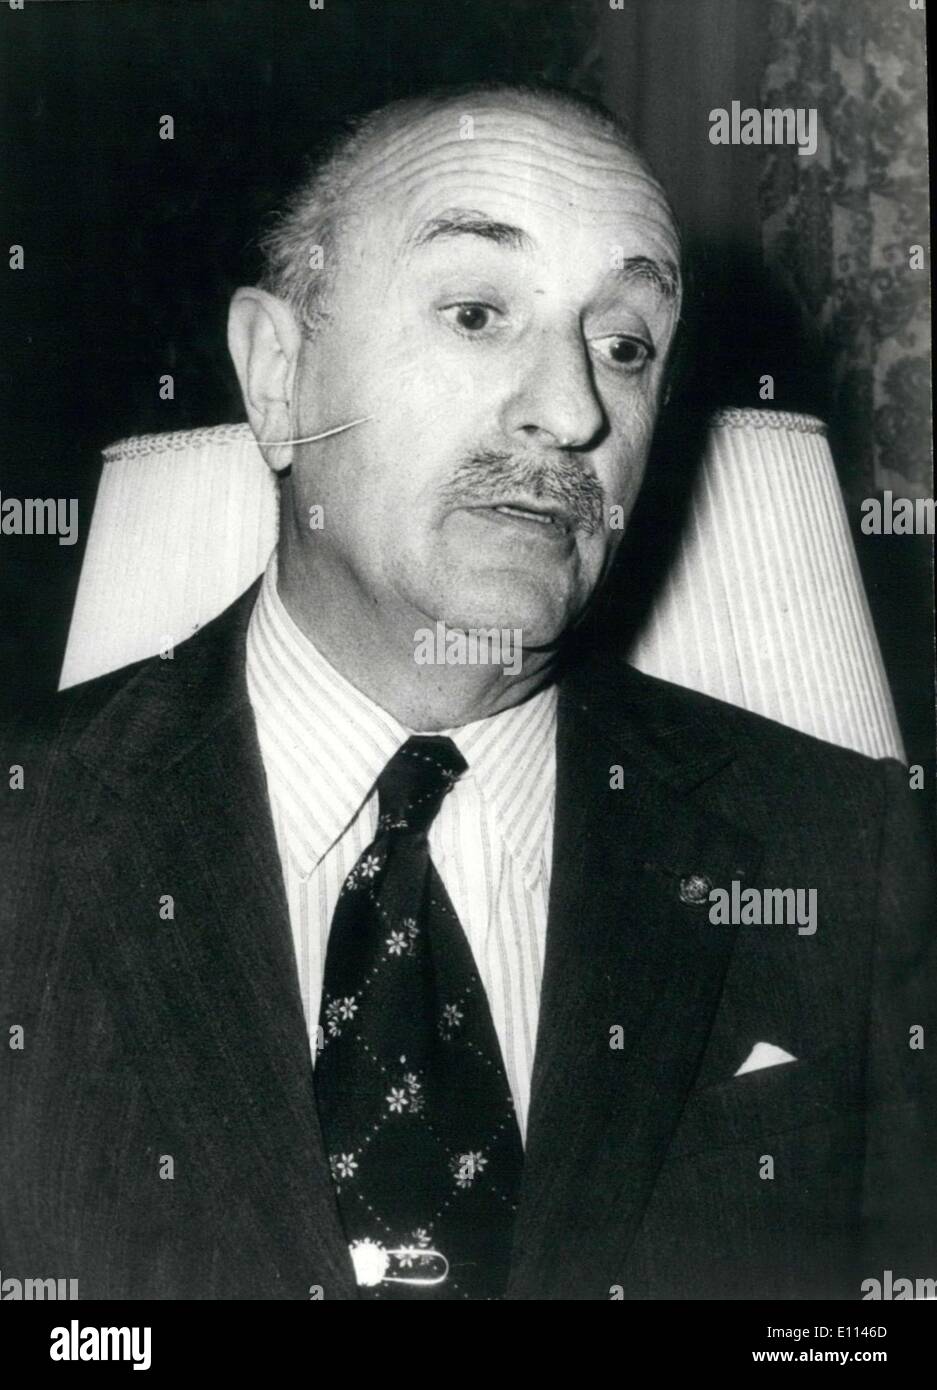 Oct. 29, 1975 - Here is a portrait of Spain's President of the Regency, Alejandro Rodr?guez de Valc?rcel, who is waiting until Prince Juan Carlos succeeds. Stock Photo